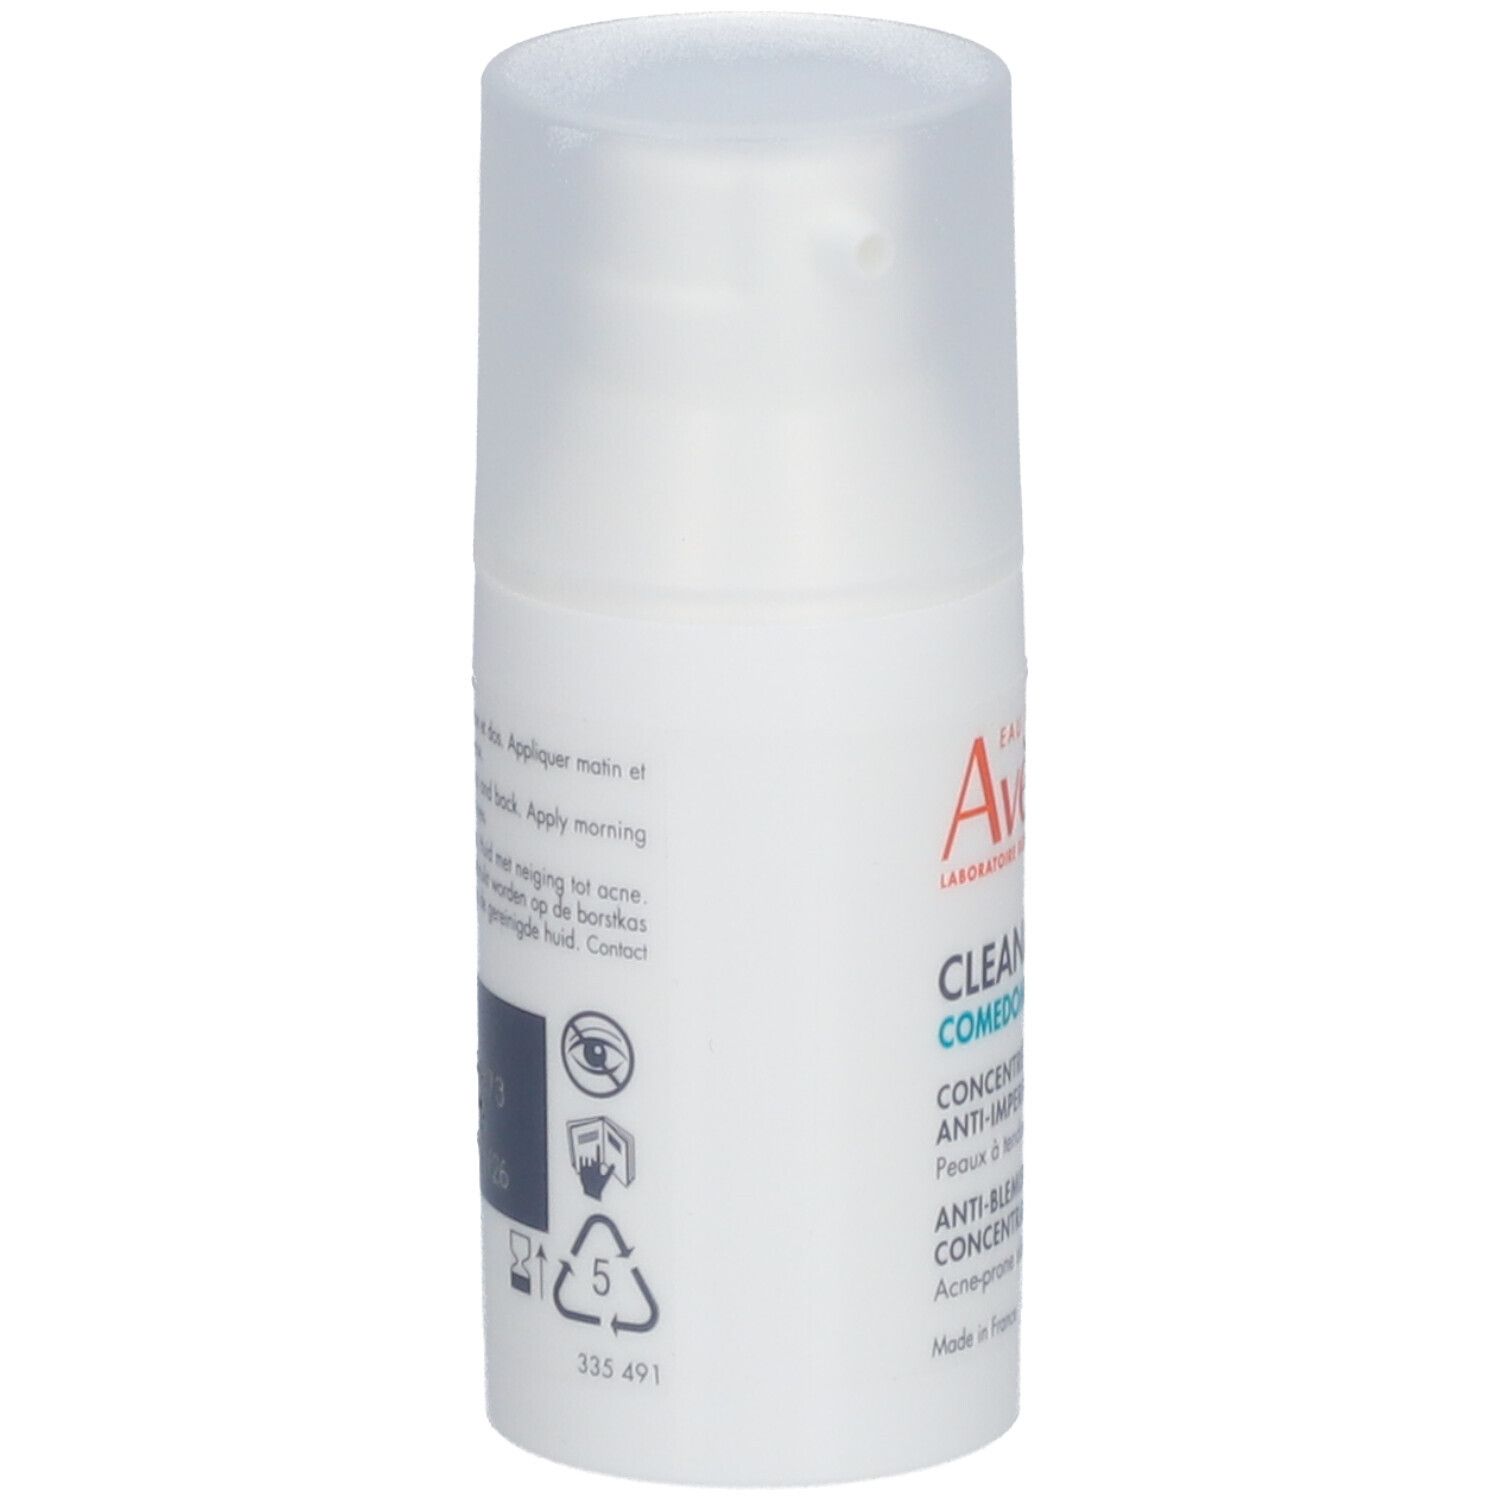 Avène Cleanance Comedomed Concentré Anti-imperfections